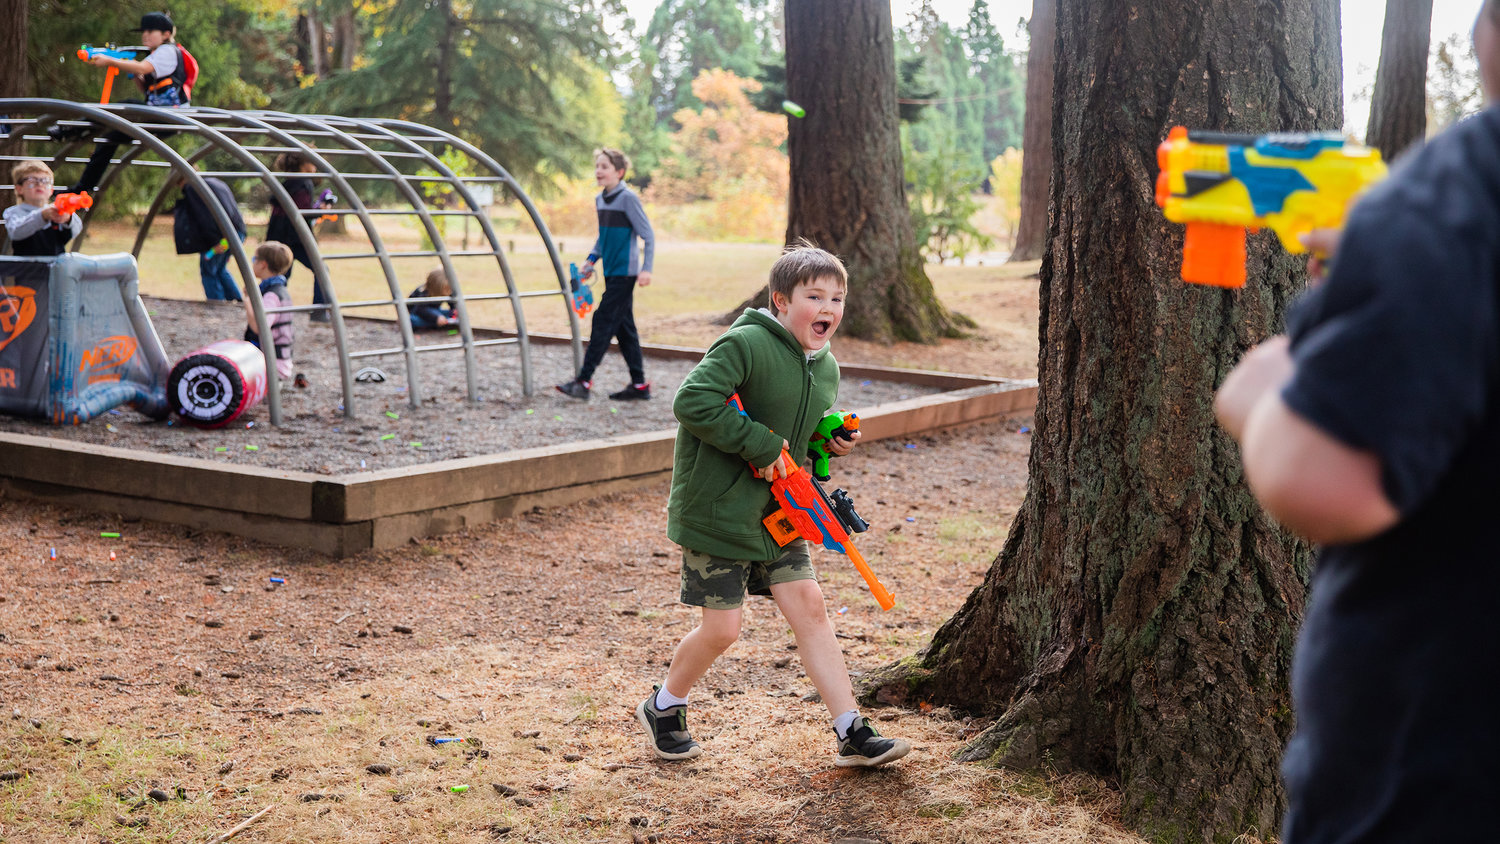 Kids look to return fire during a Nerf War at Borst Park on Sunday.